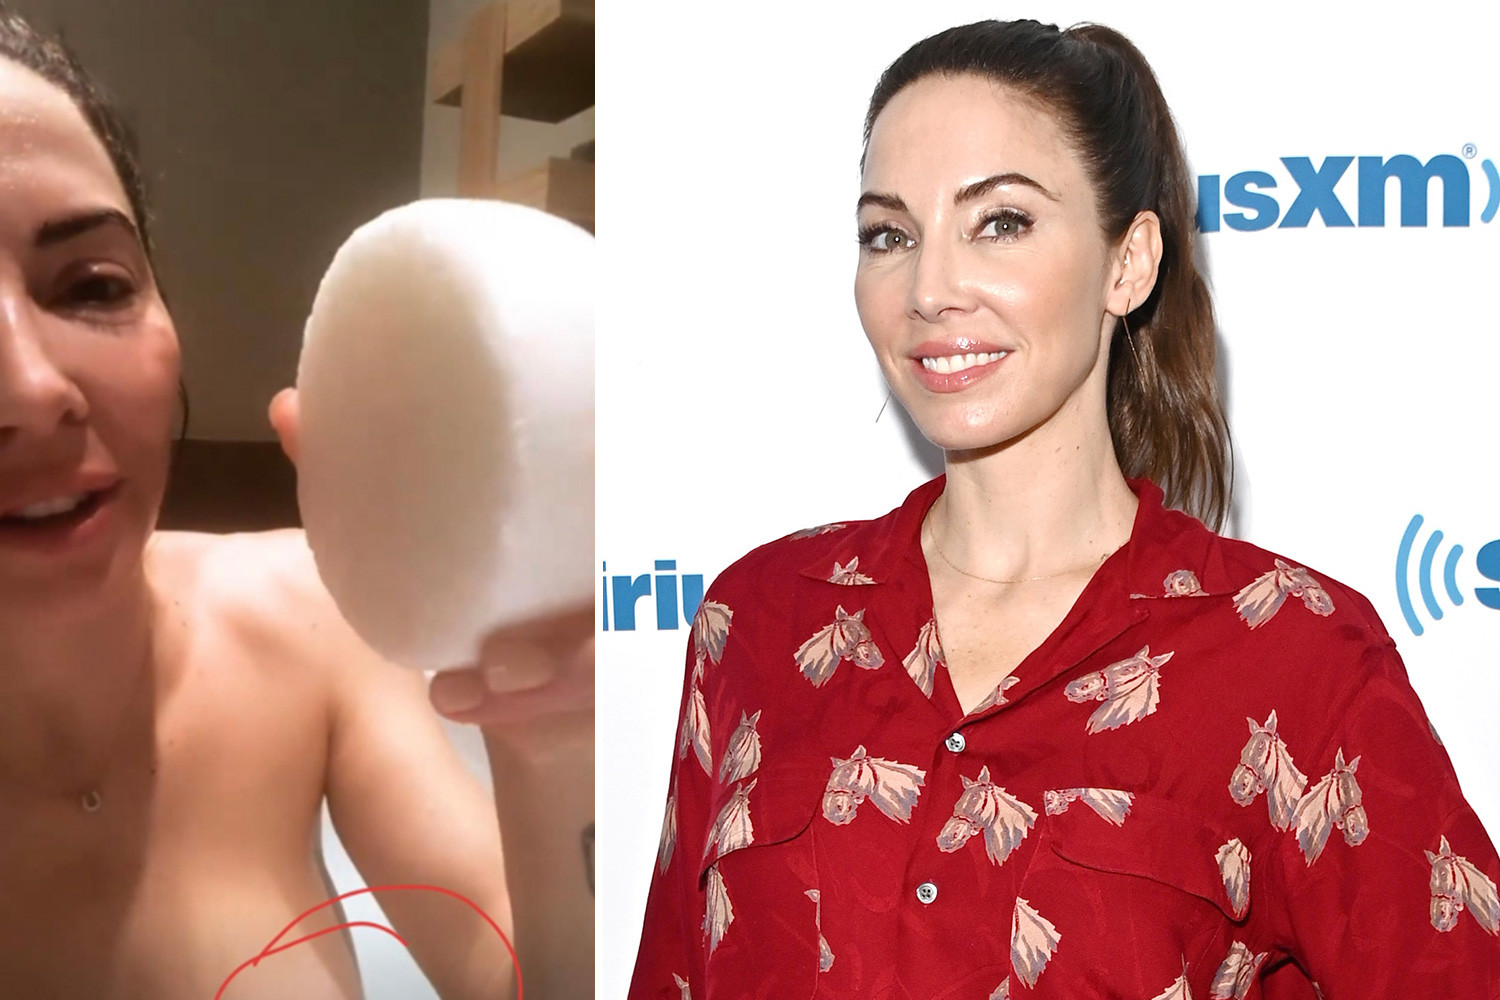 anthony catalan recommends gianna michaels fortune teller pic